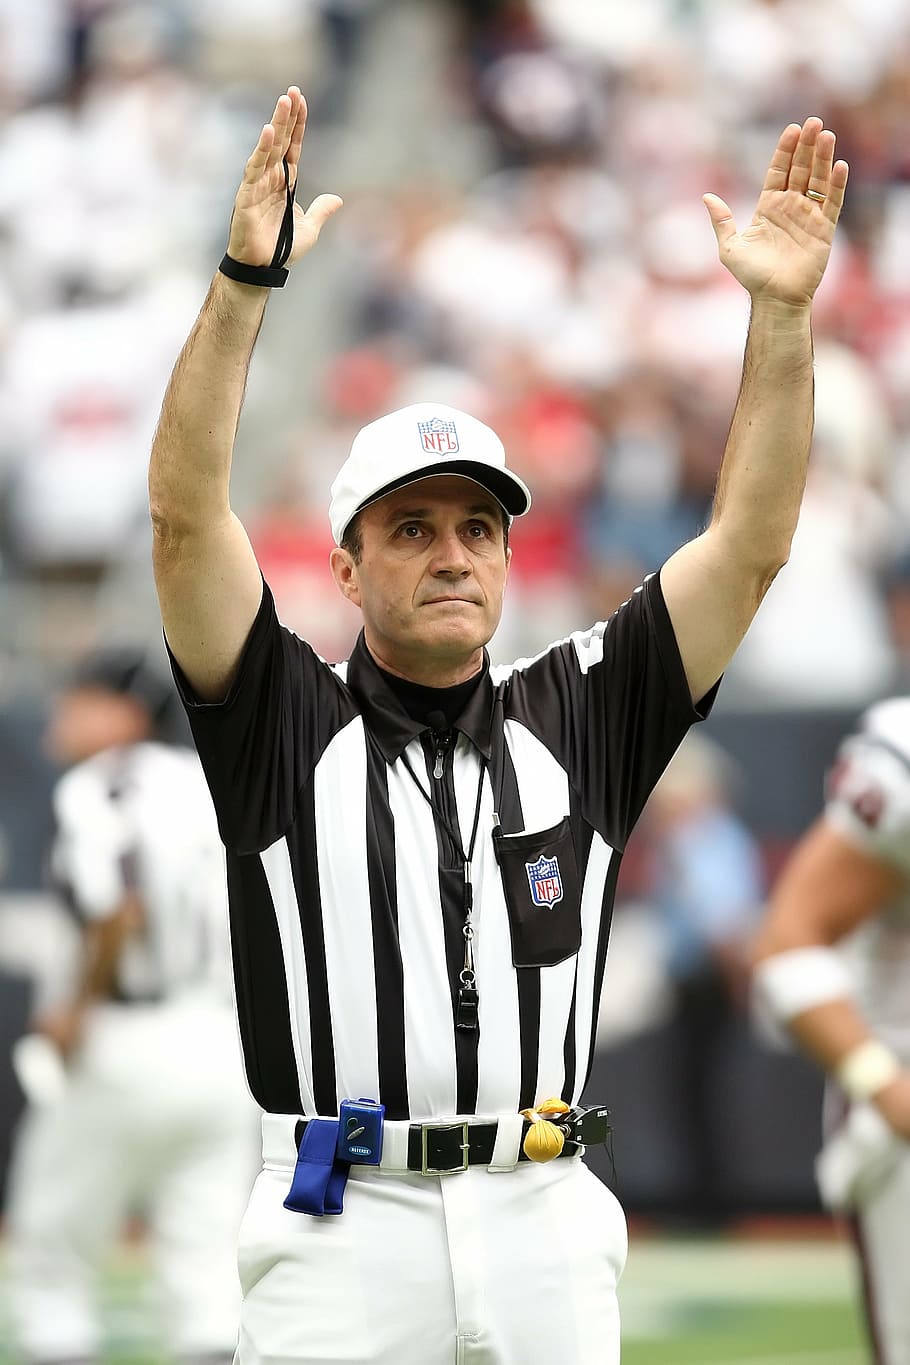 referee, raising, hand, professional football, touchdown, official, score, nfl, game, sport